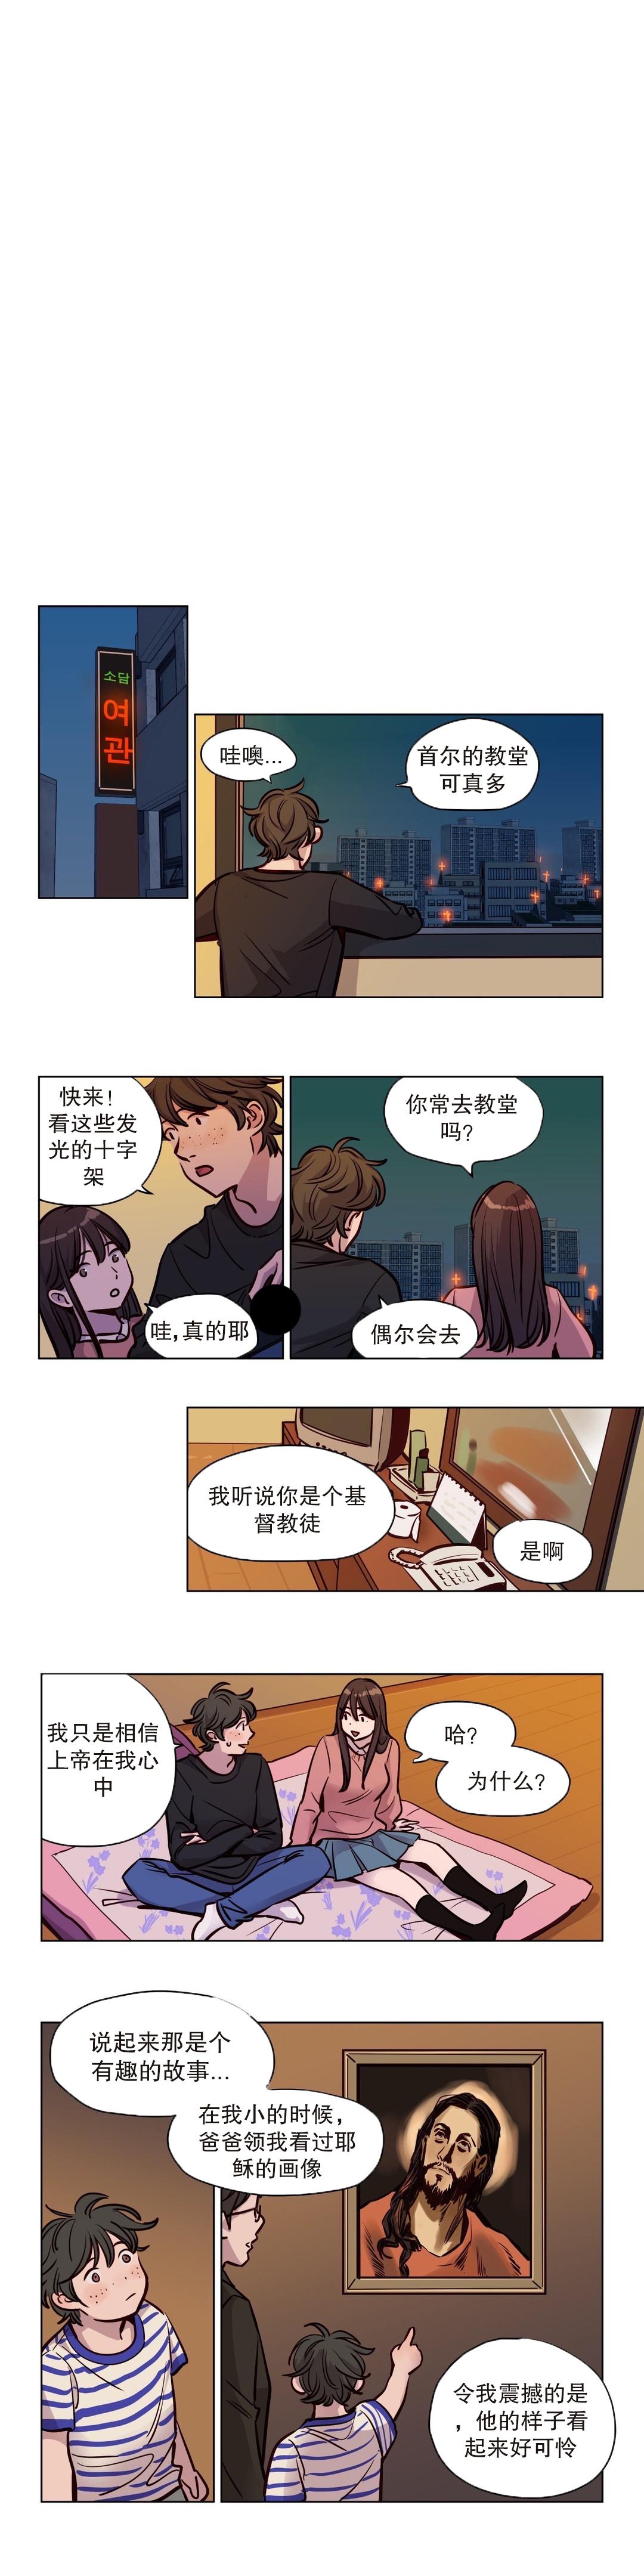 [Ramjak] 赎罪营(Atonement Camp) Ch.50-52 (Chinese) 28